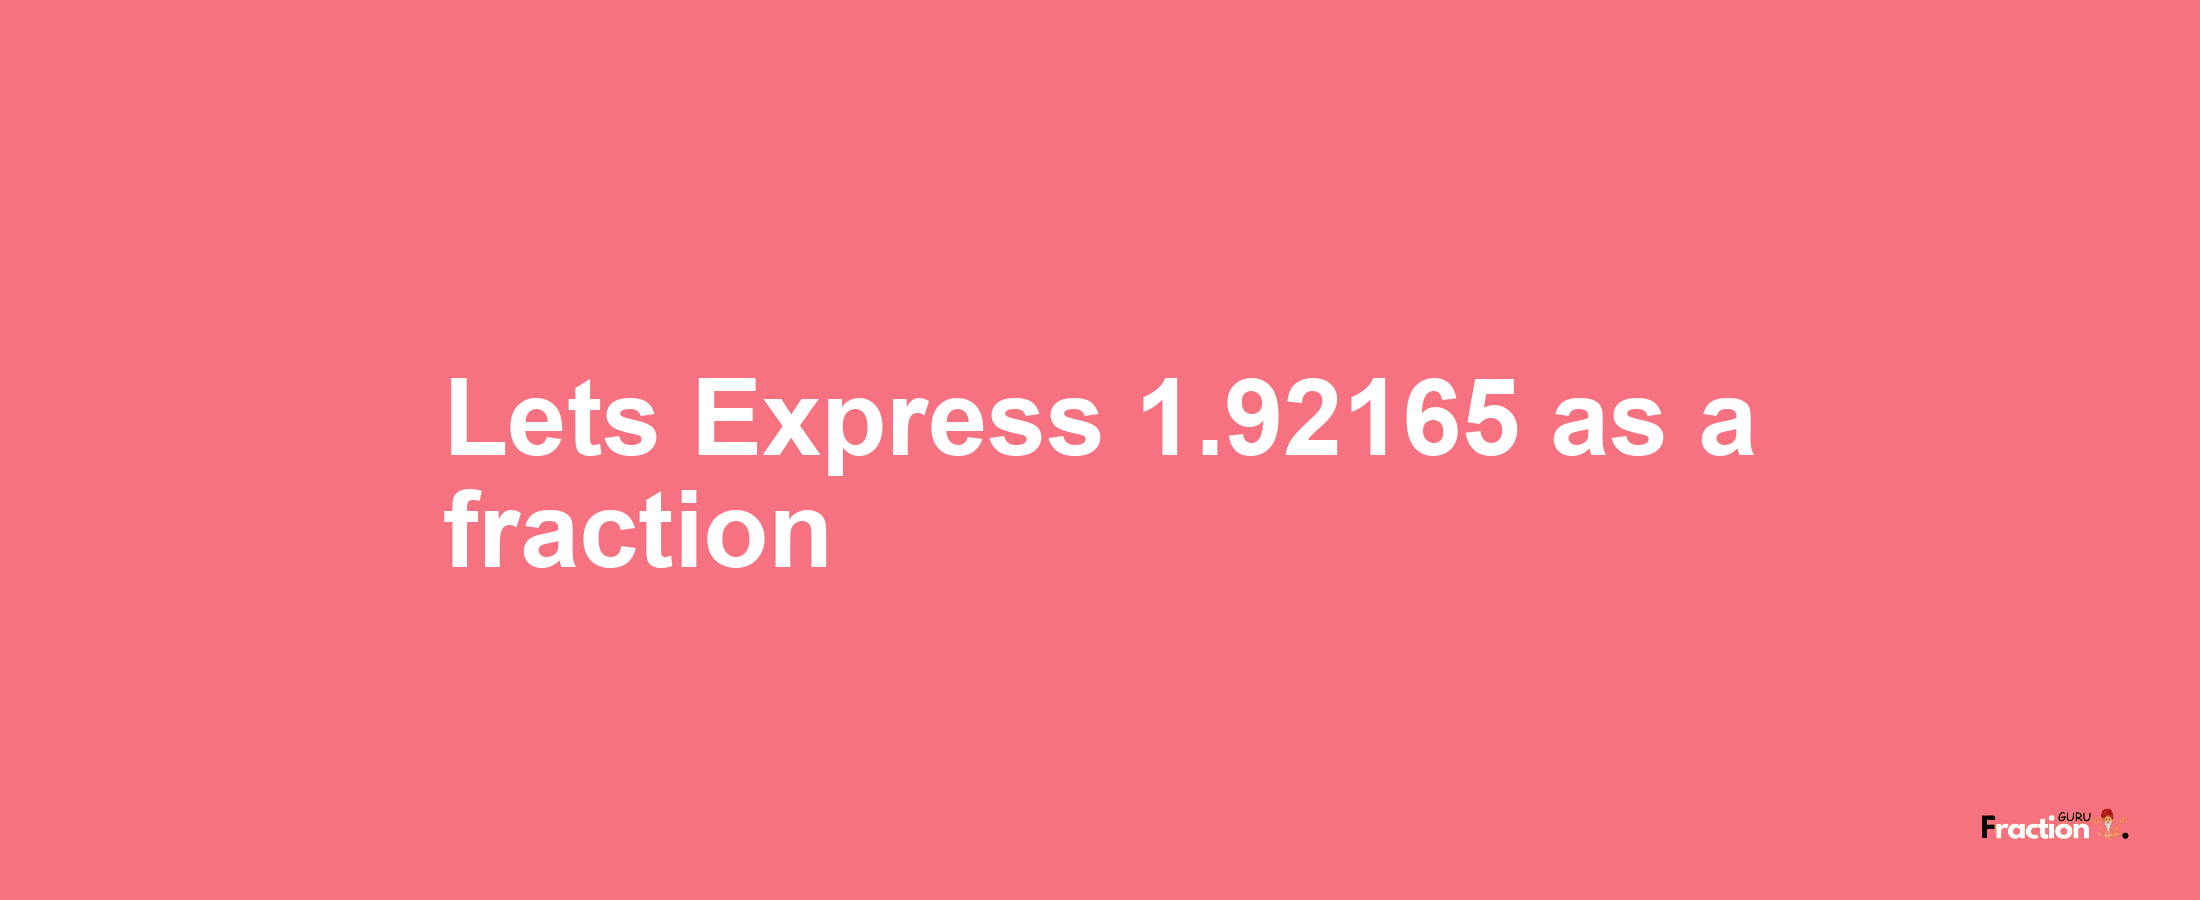 Lets Express 1.92165 as afraction